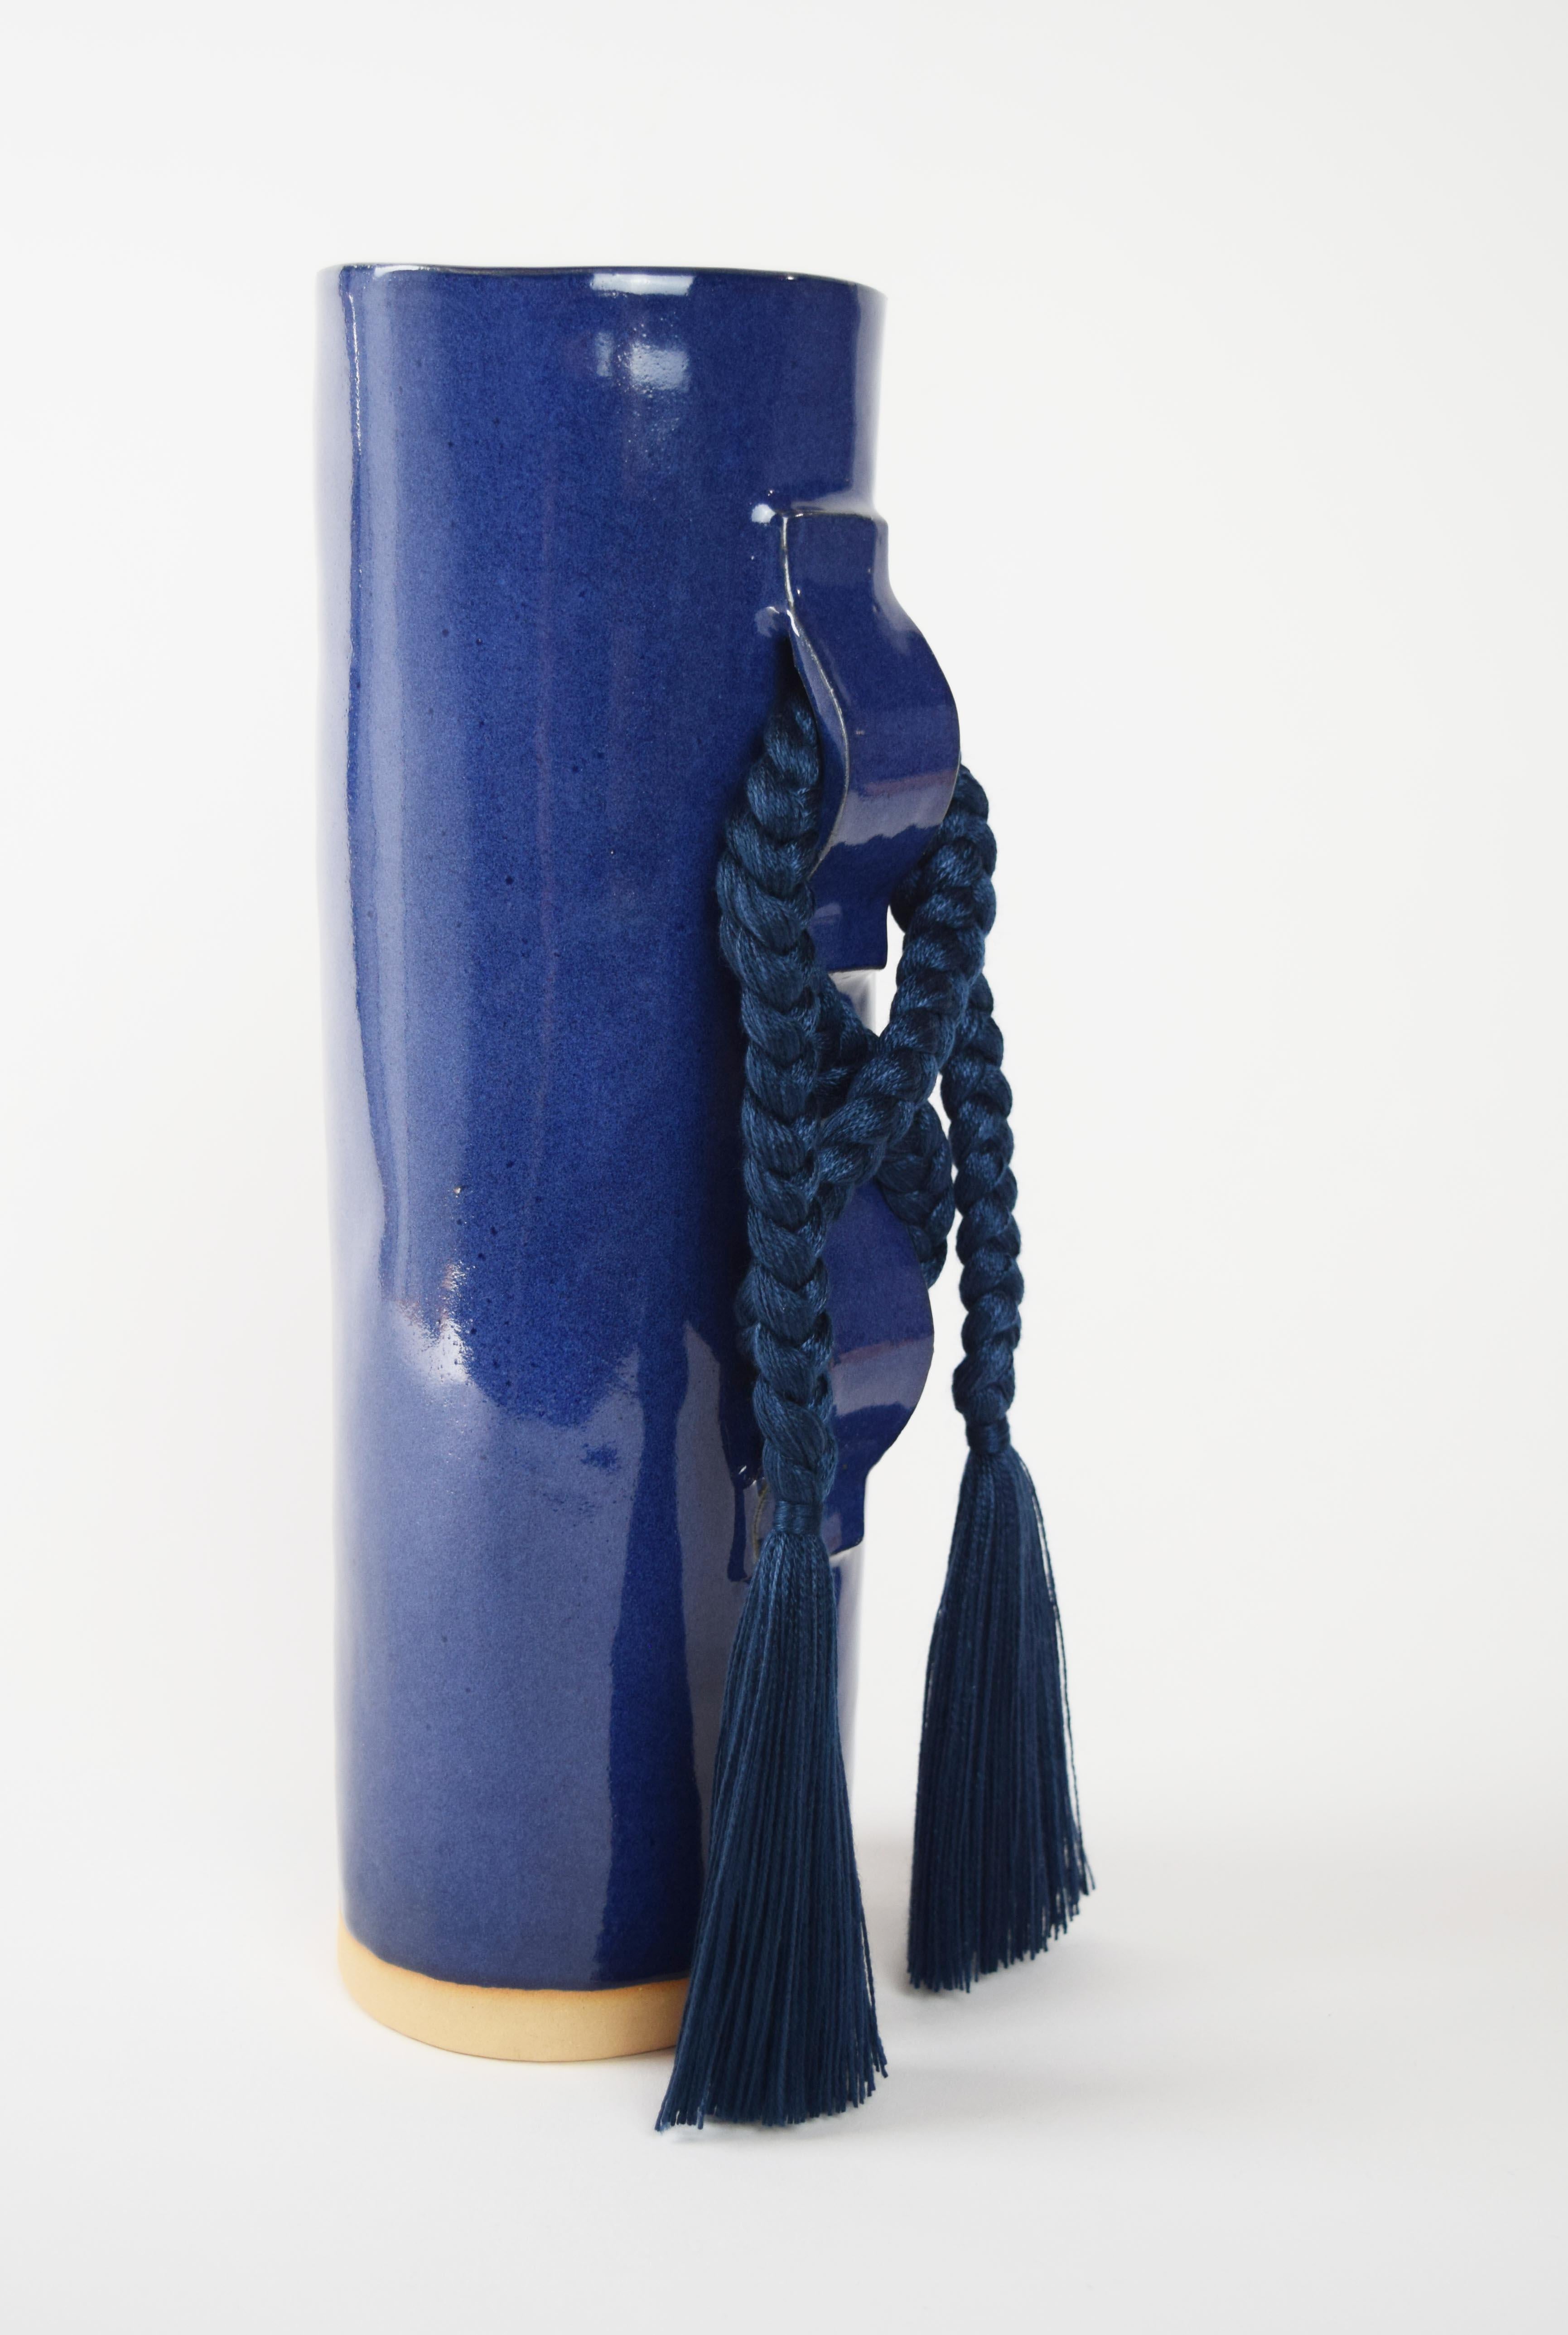 Vase #696 by Karen Gayle Tinney

Featuring a large gestural knot, this vase takes inspiration from the braided details of Karen’s one of a kind wall sculptures.

Hand formed stoneware with deep blue glaze. Navy tencel braided details (braid is sewn